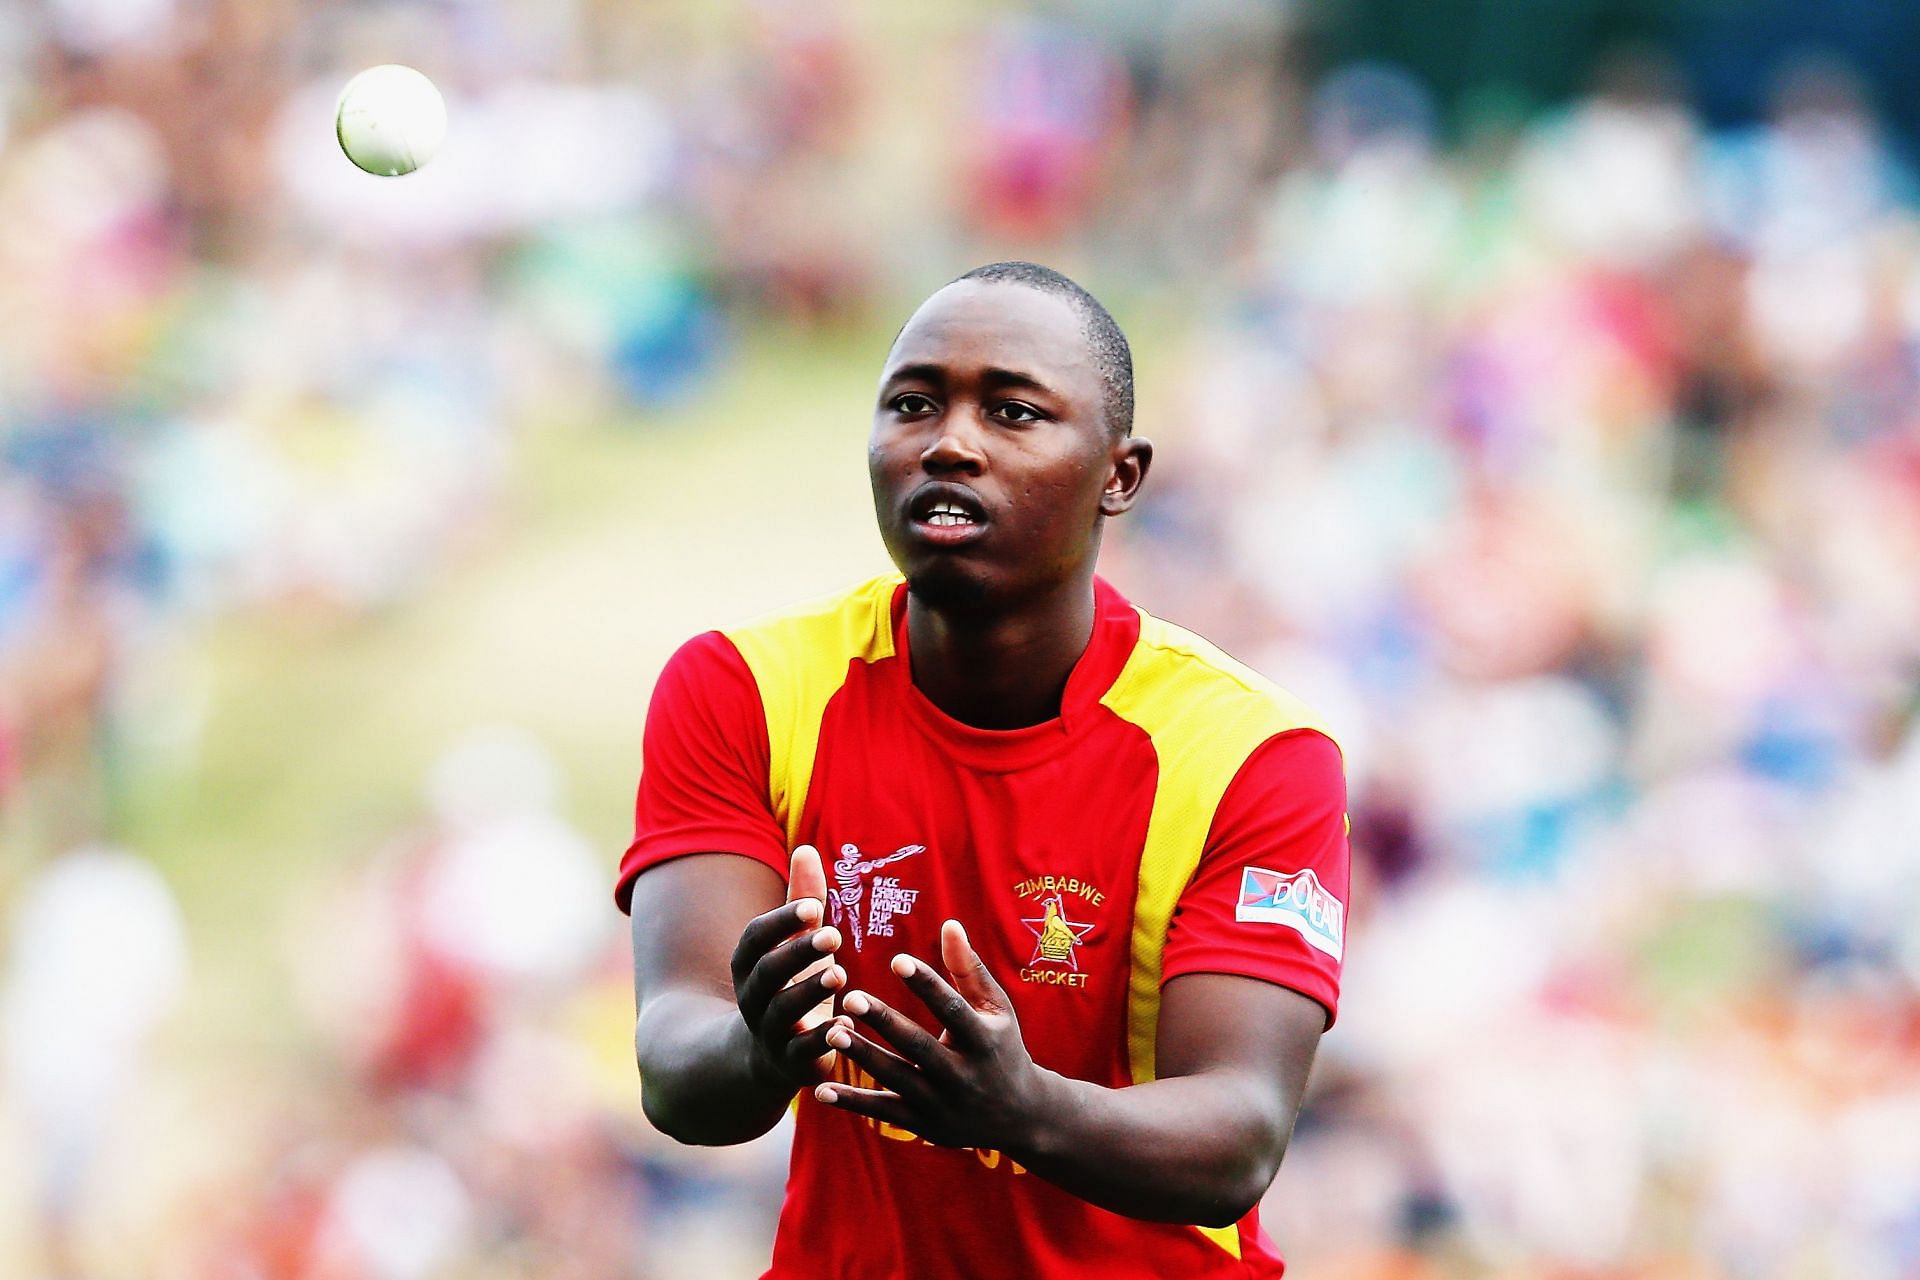 South Africa v Zimbabwe - 2015 ICC Cricket World Cup (Image courtesy: Getty Images)